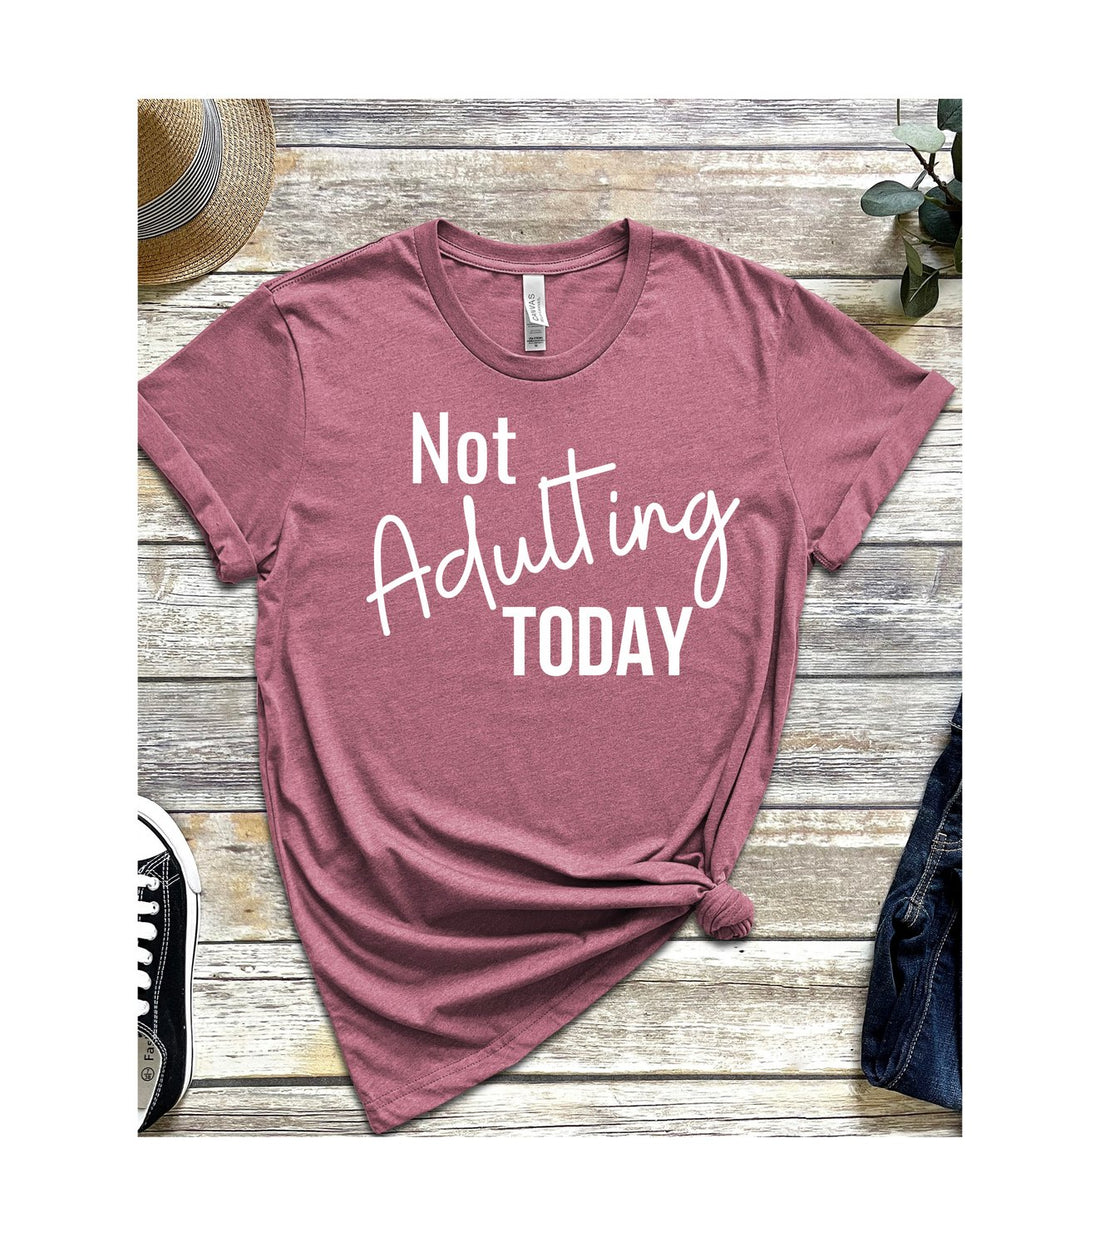 Not Adulting Today - T-Shirt - Positively Sassy - Not Adulting Today